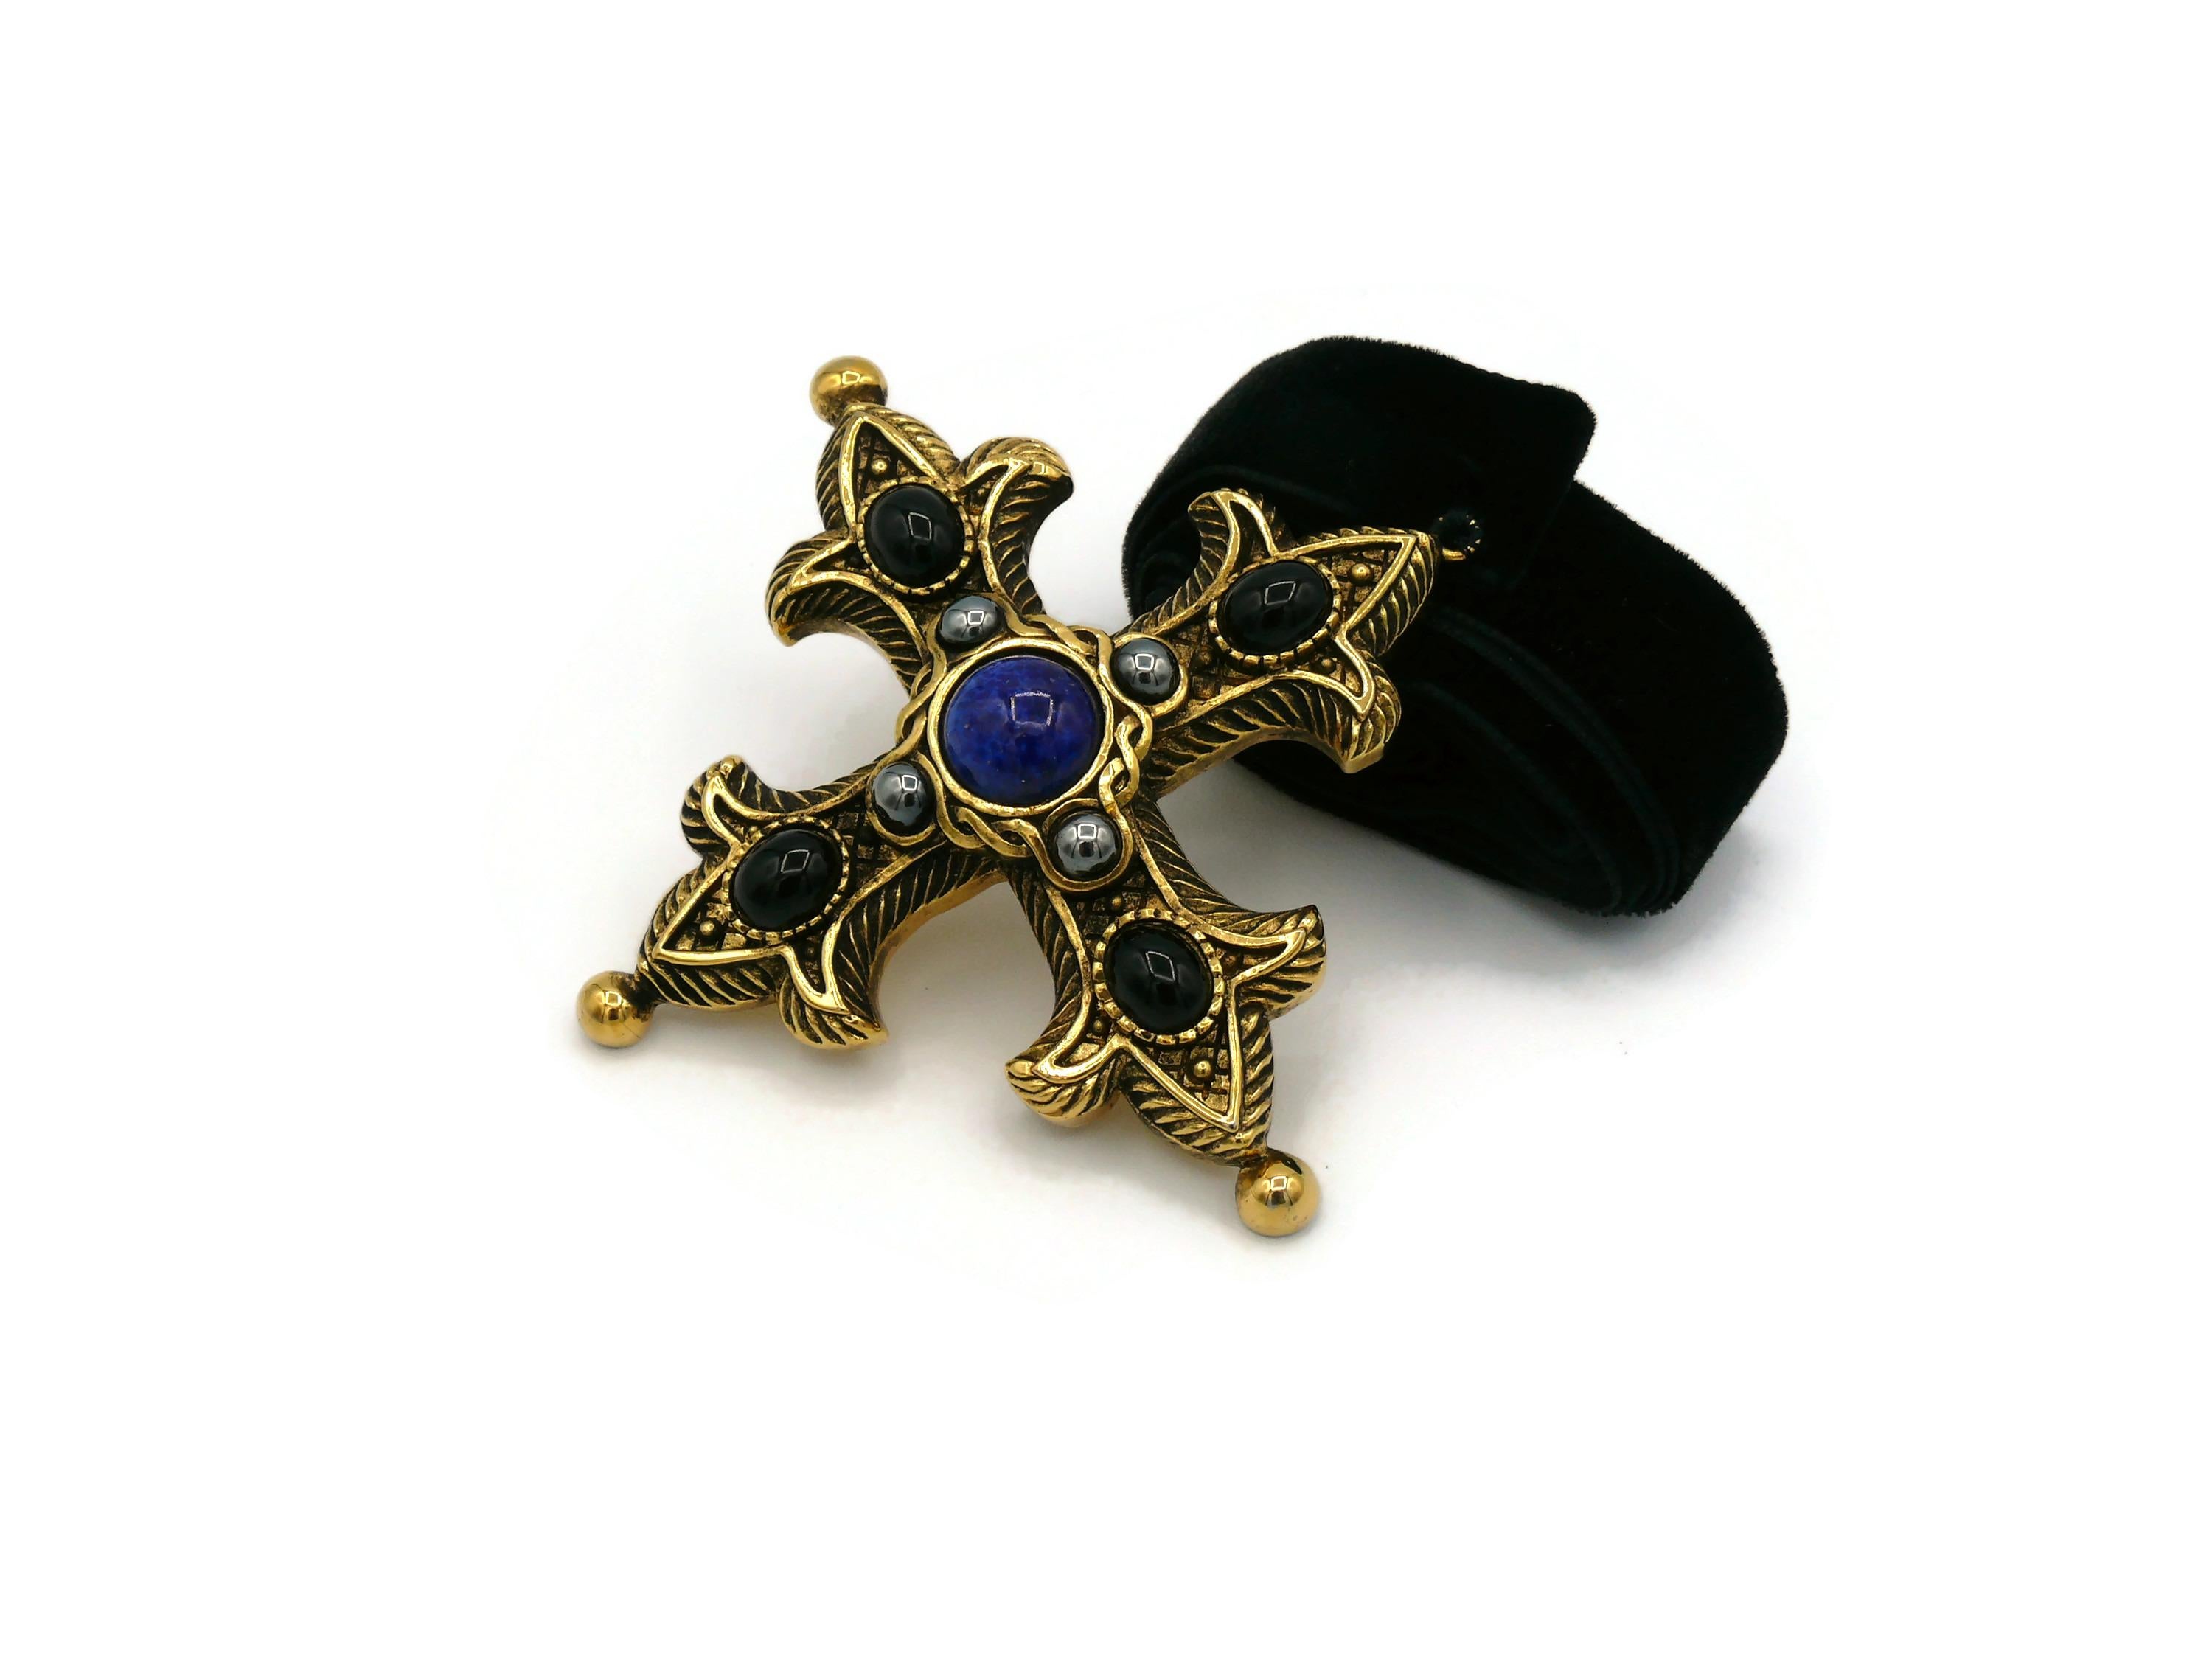 Christian Dior Boutique Vintage Embellished Cross Pendant  In Excellent Condition For Sale In Nice, FR